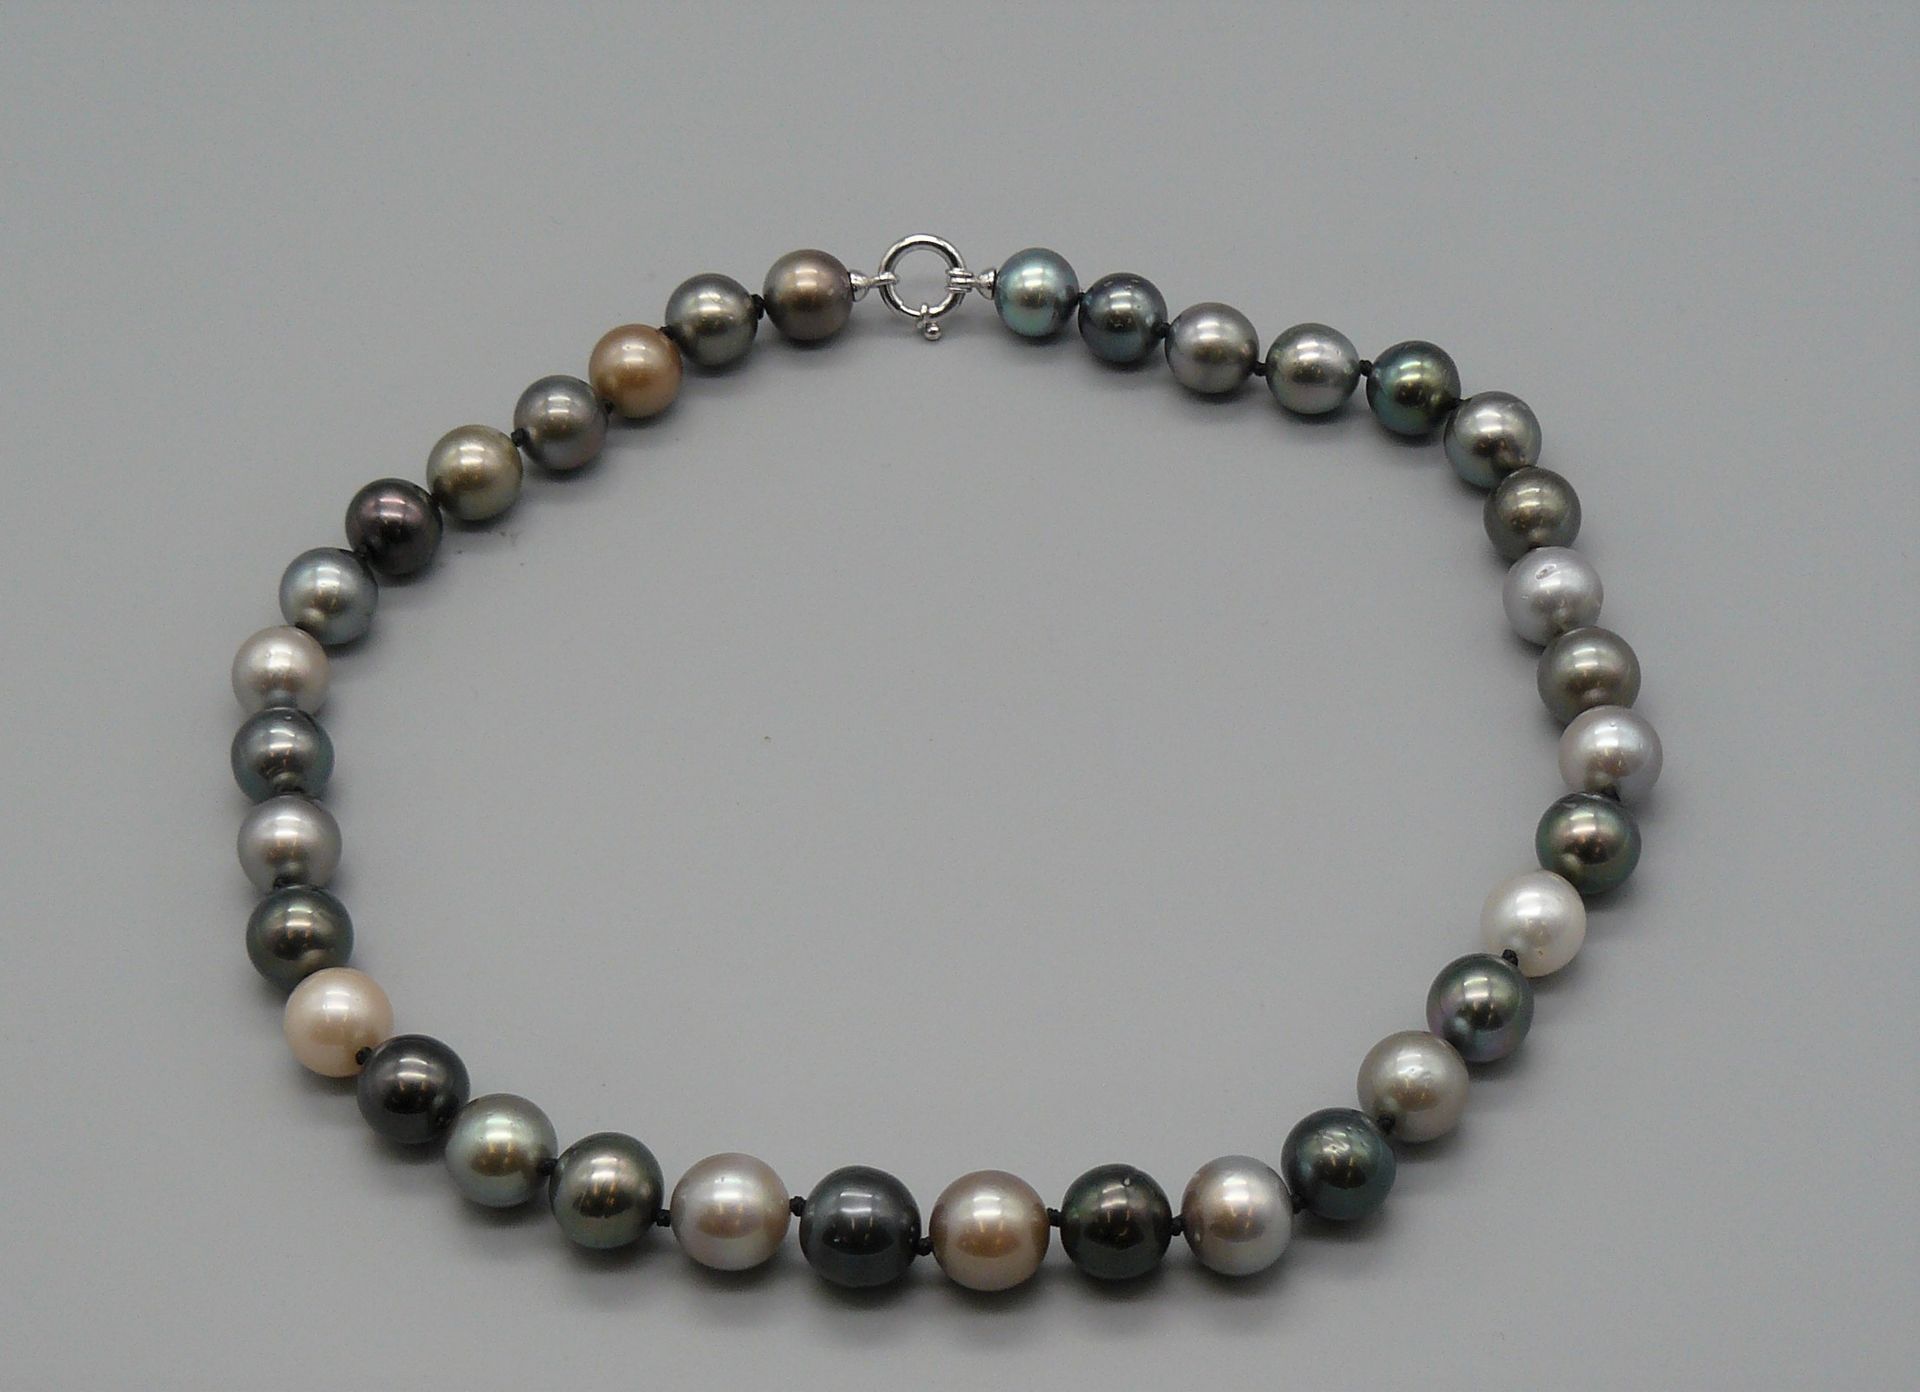 Null a necklace of 35 Tahitian pearls of alternating colors - Ø from 9 to 11 mm,&hellip;